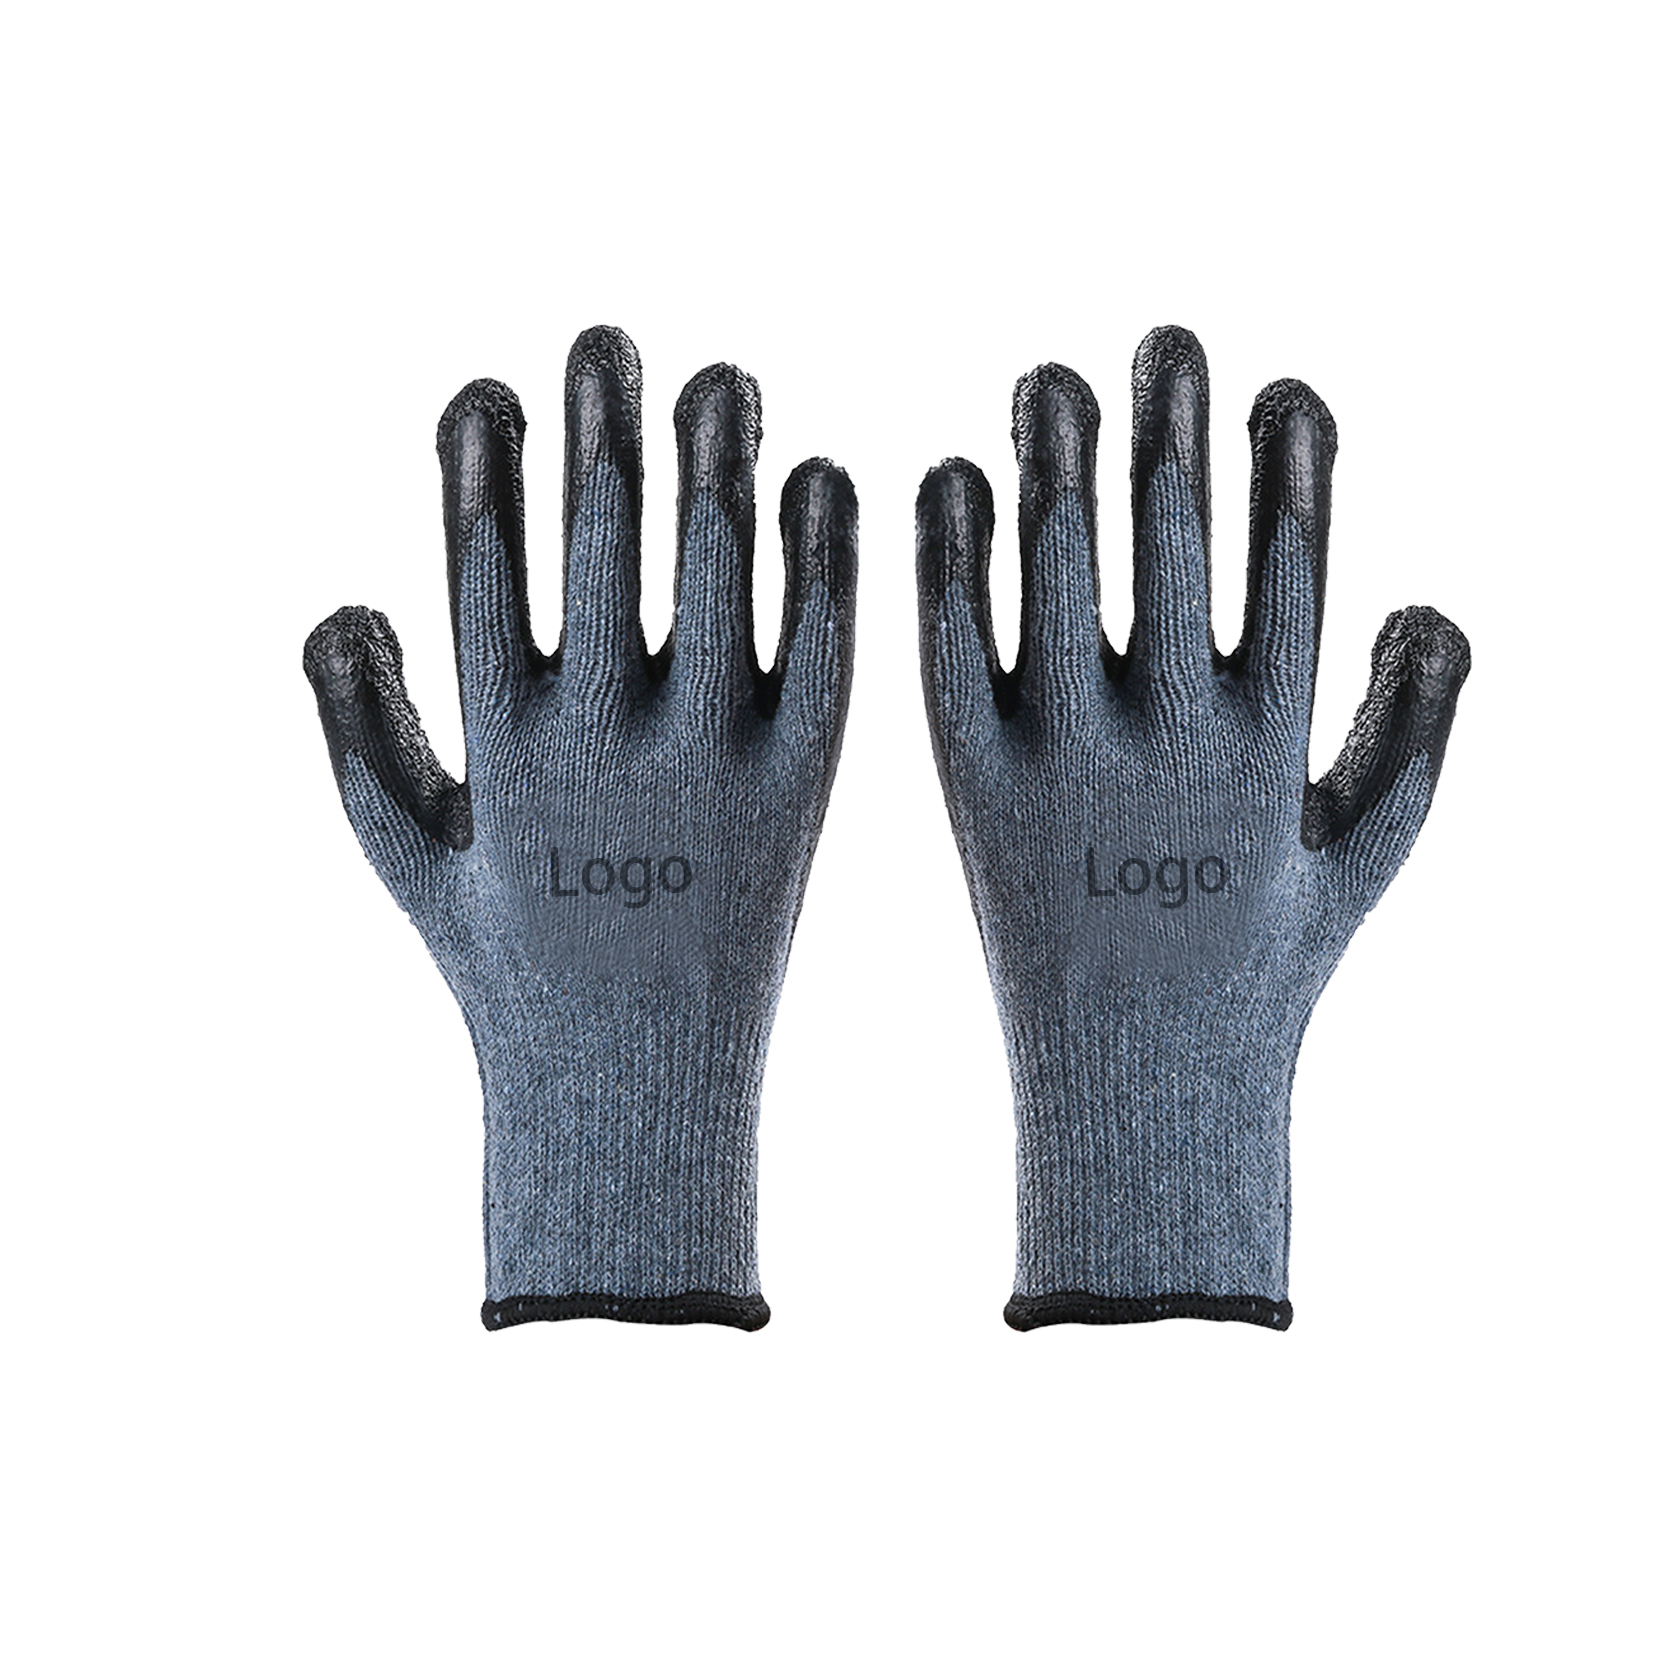 All-Purpose Work Gloves with Latex Coated Palm Gloves